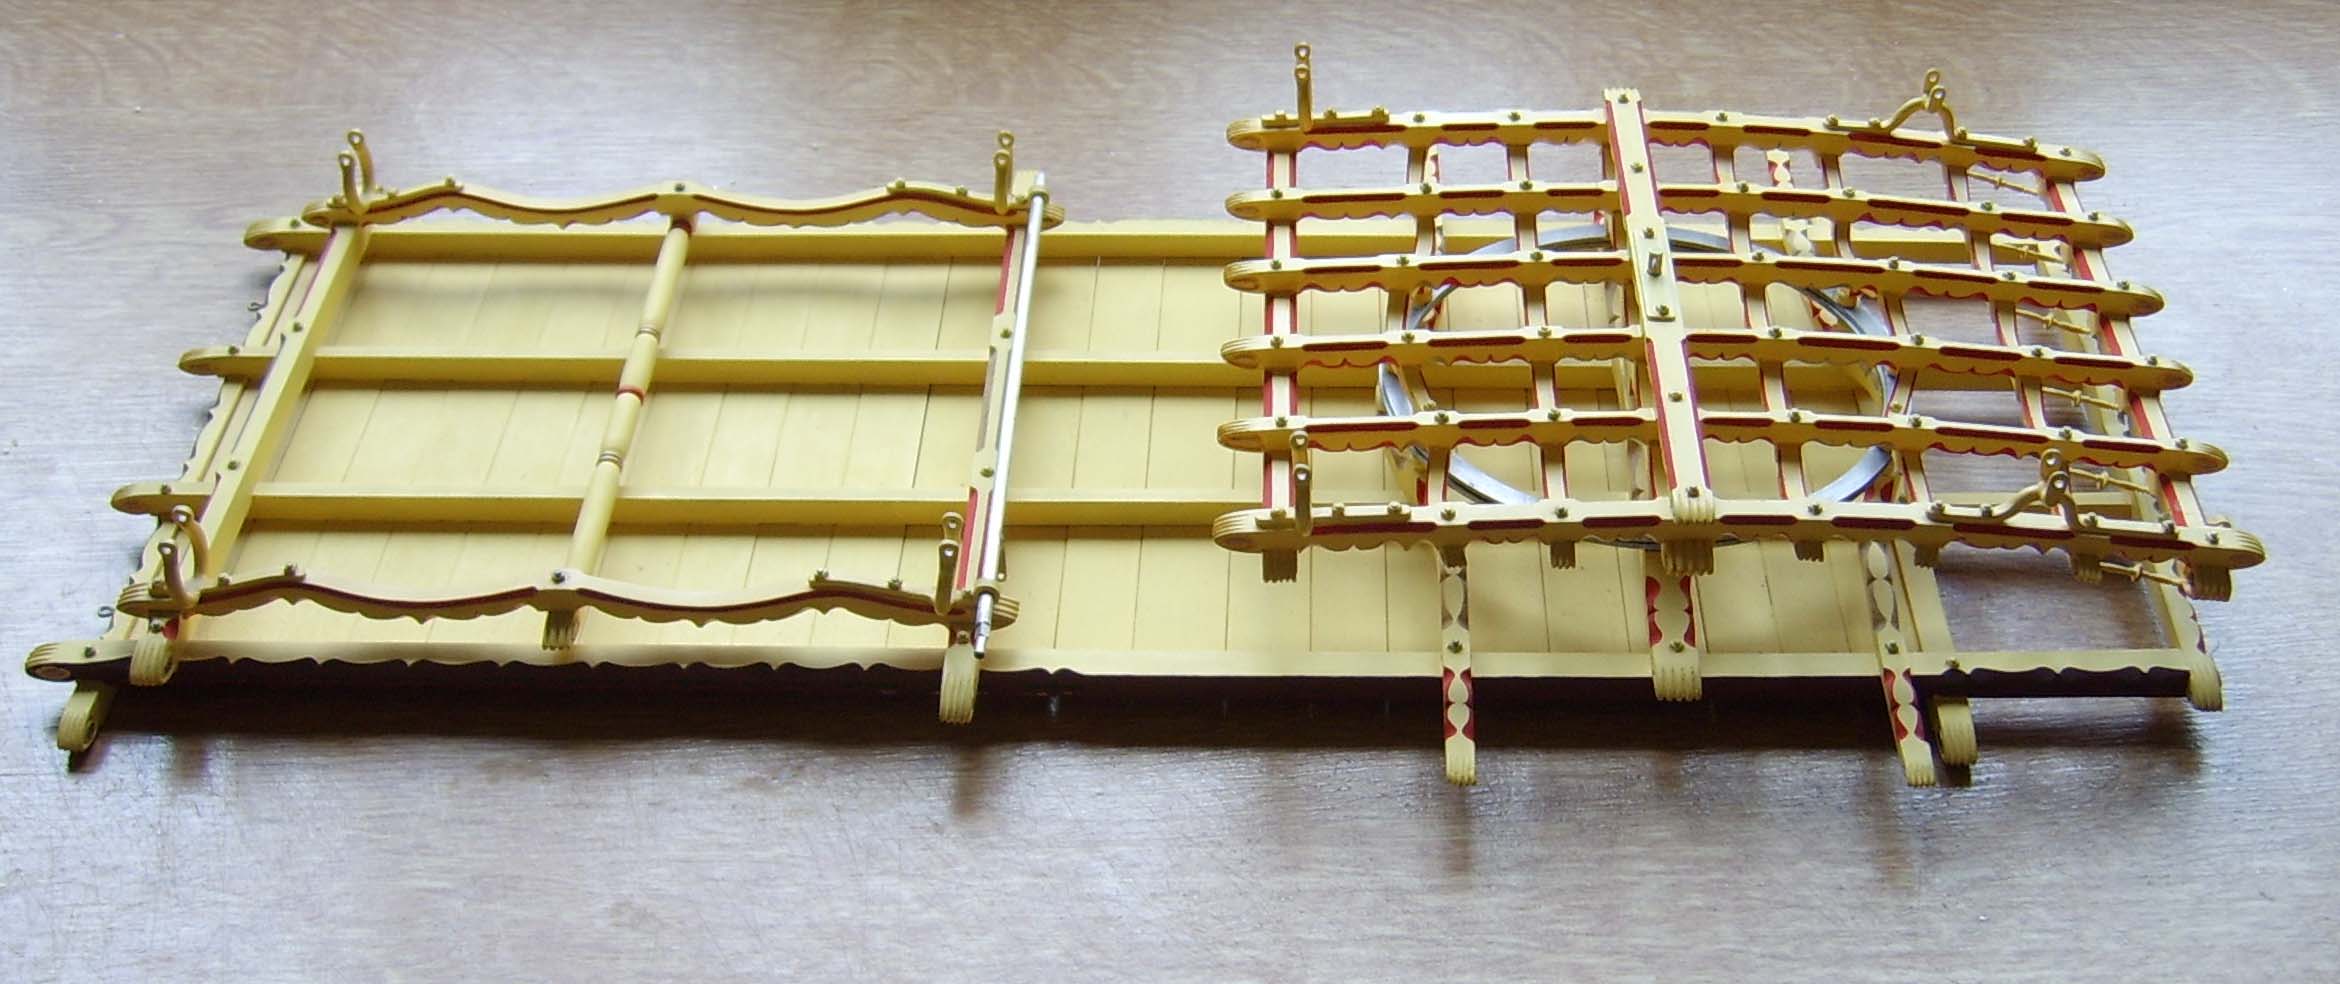 This is a view of the underside of the body (upturned) of the Ledge Waggon. The bearing plate of the forecarriage is placed in position on the bearing plate of the body. There is a lot of intricate carving and painting on both the body and forecarriage. 